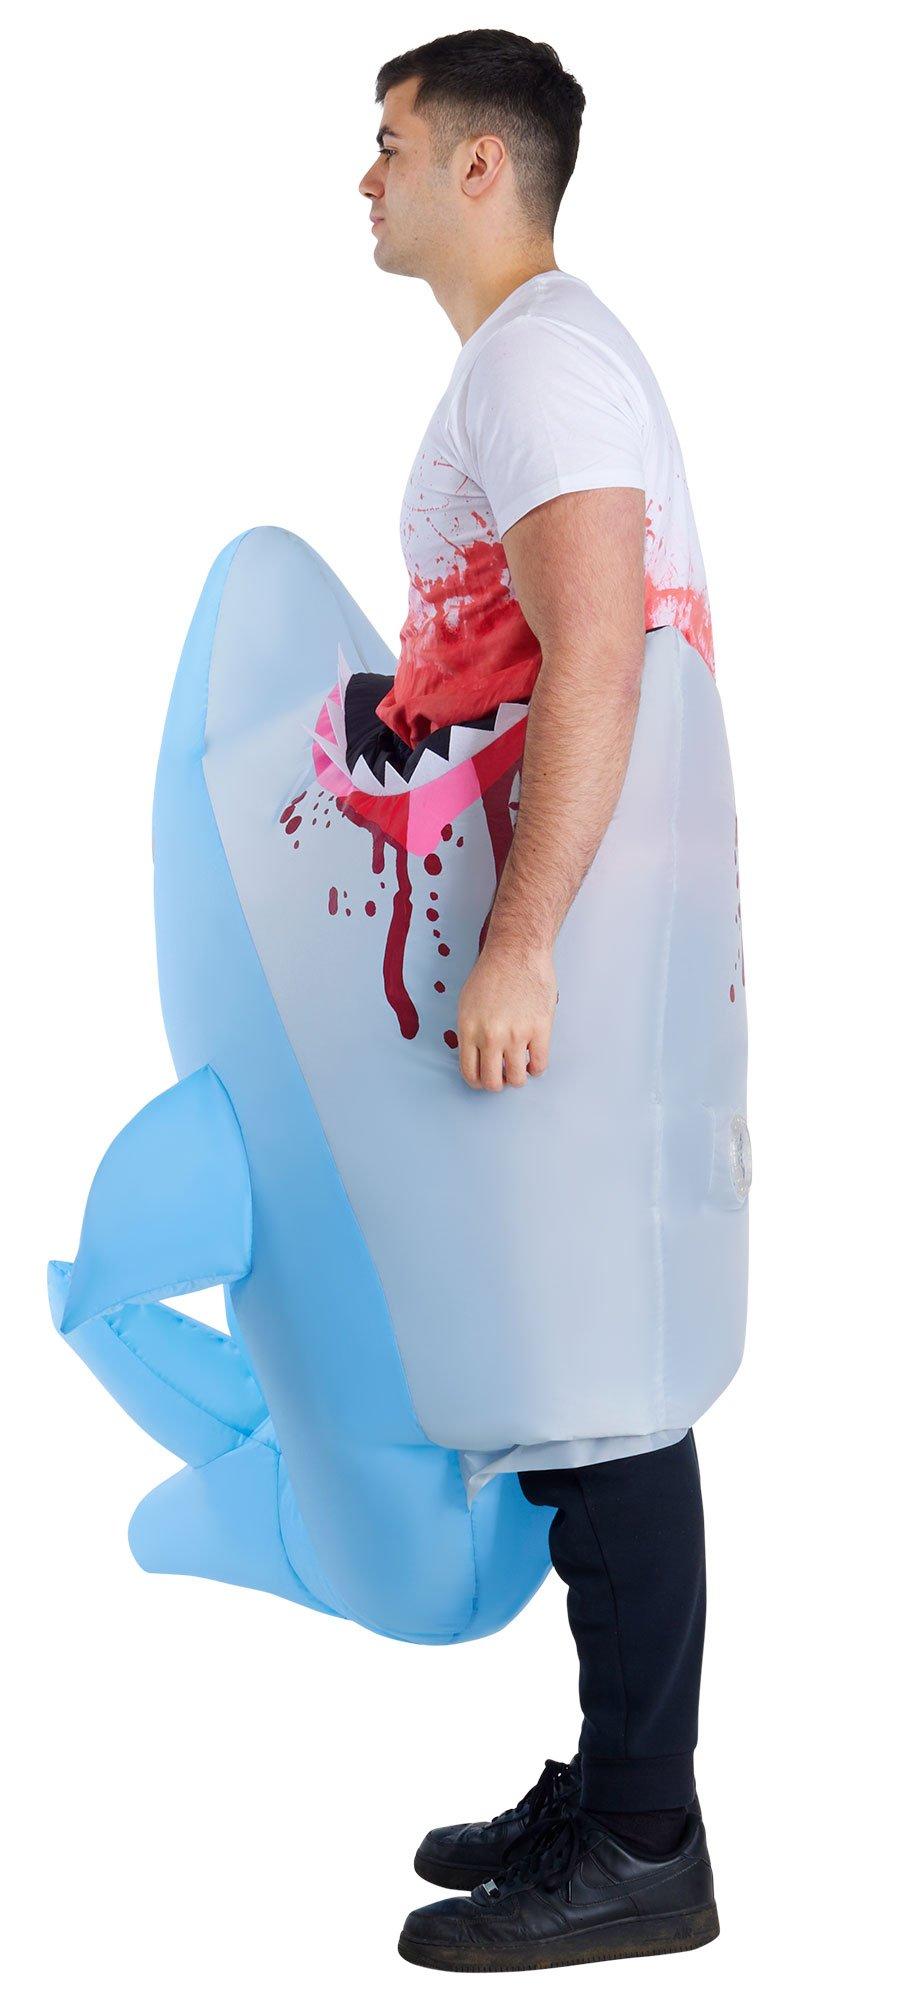 Adult Inflatable Man-Eating Shark Costume Party City